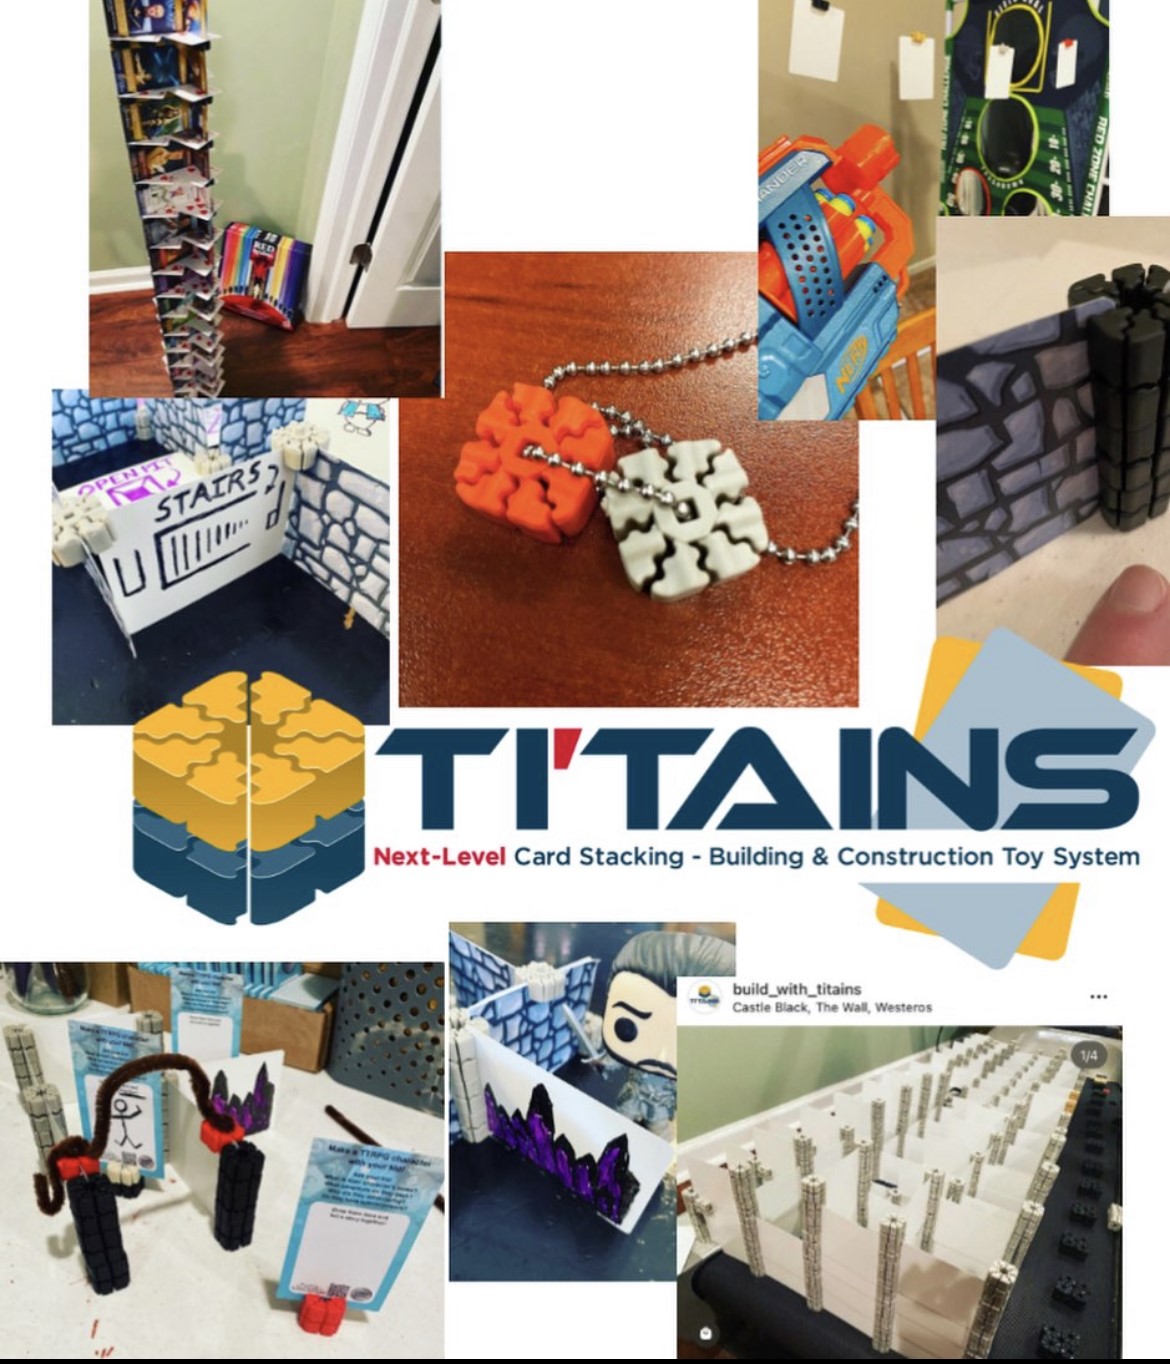 Ti'Tains name with photos showing examples of how to use them like card tower connectors to build and to hold cards at a table.